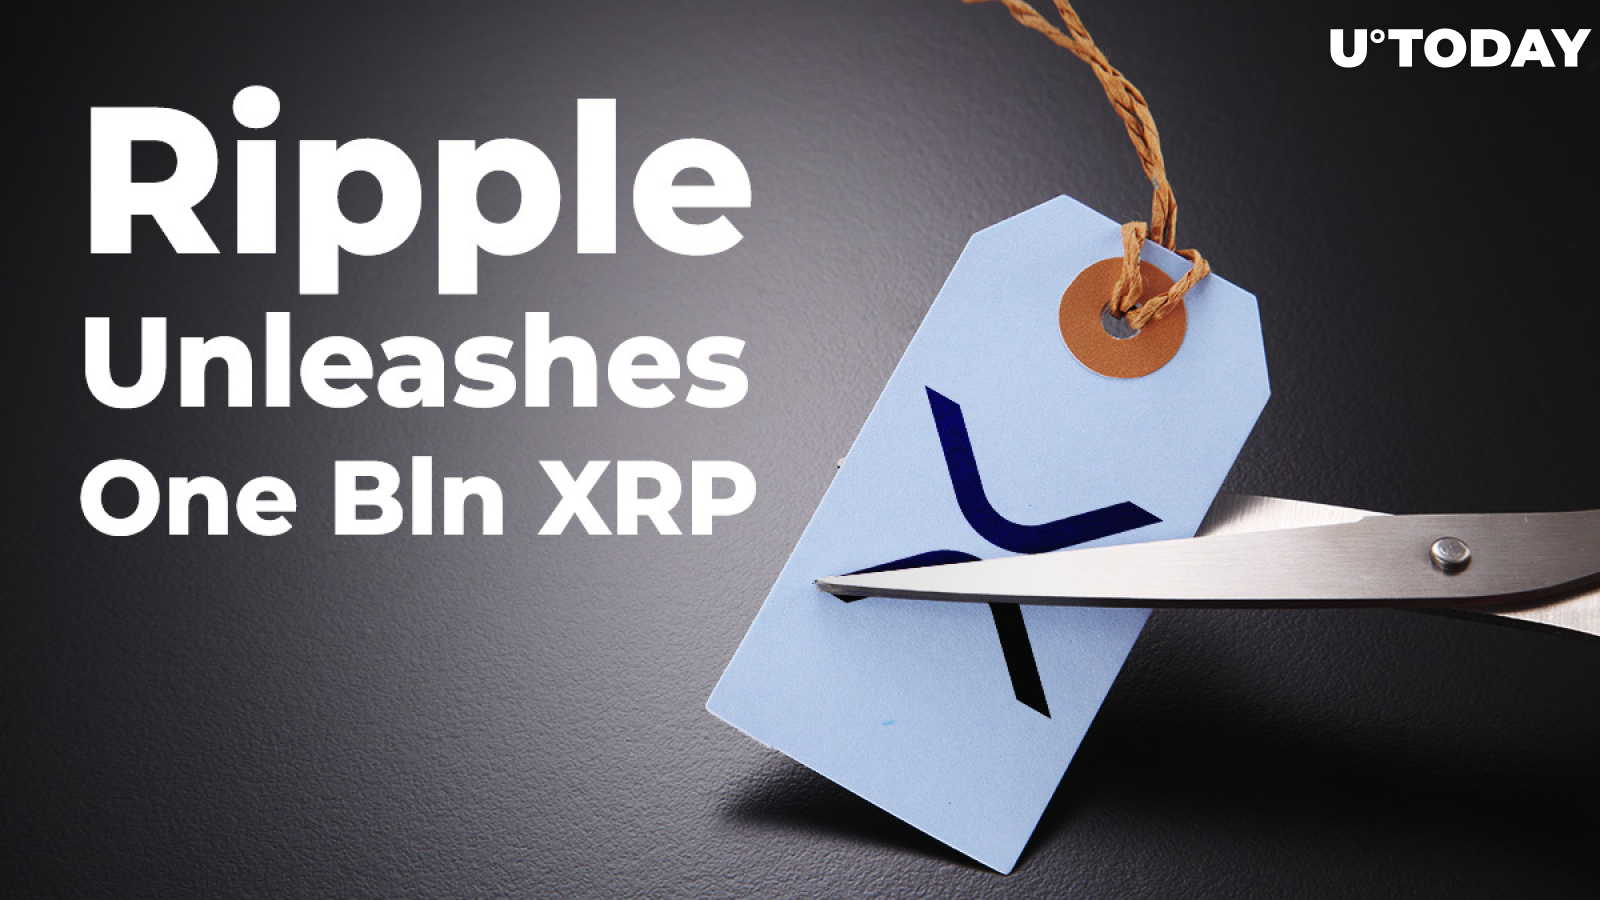 Update: Ripple Unleashes One Bln XRP from Escrow, Puts Back Almost All of It